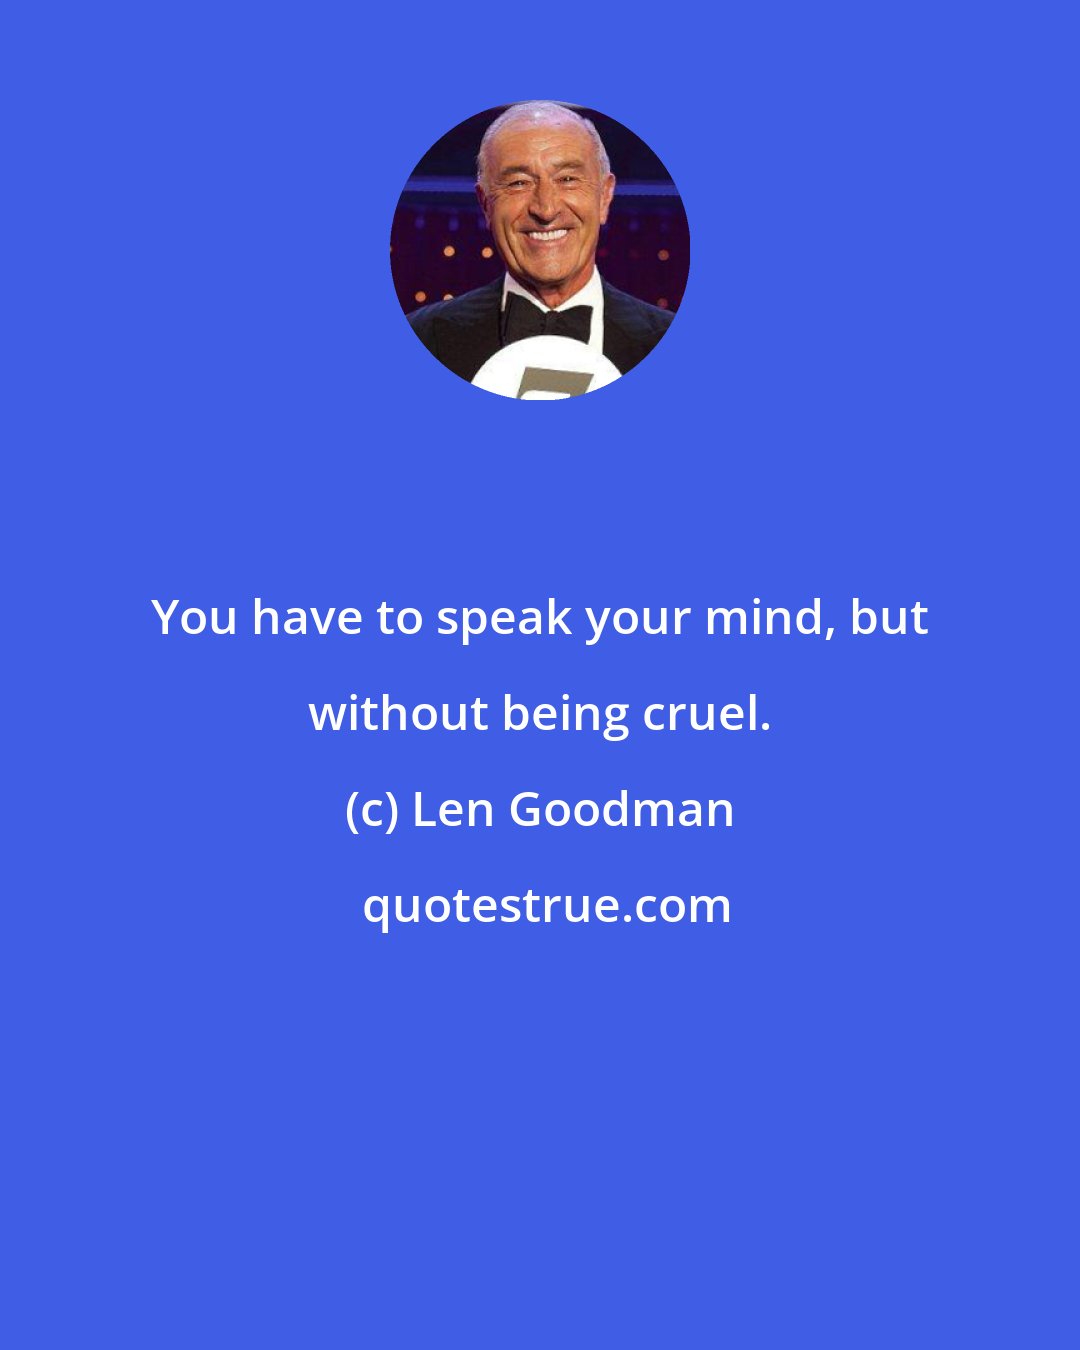 Len Goodman: You have to speak your mind, but without being cruel.